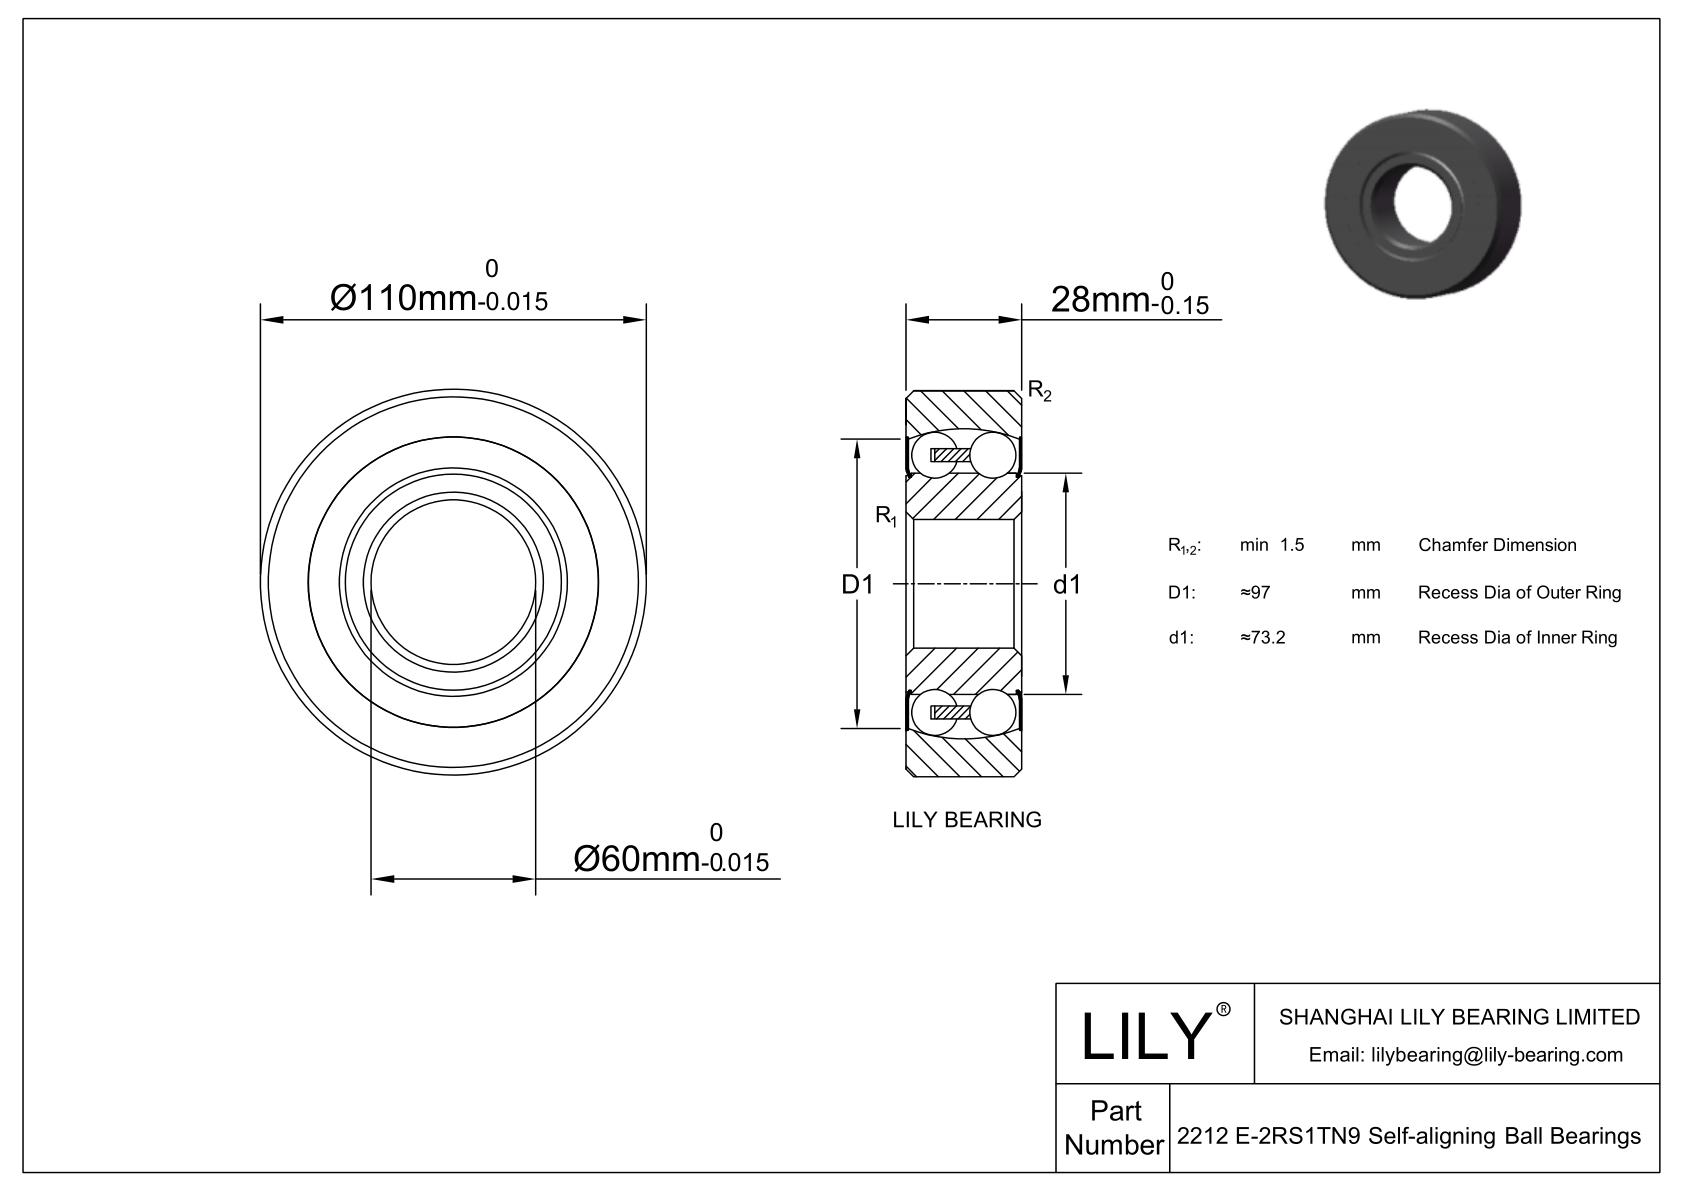 CE2212 E-SIPP Silicon Nitride Self Aligning Ball Bearings cad drawing